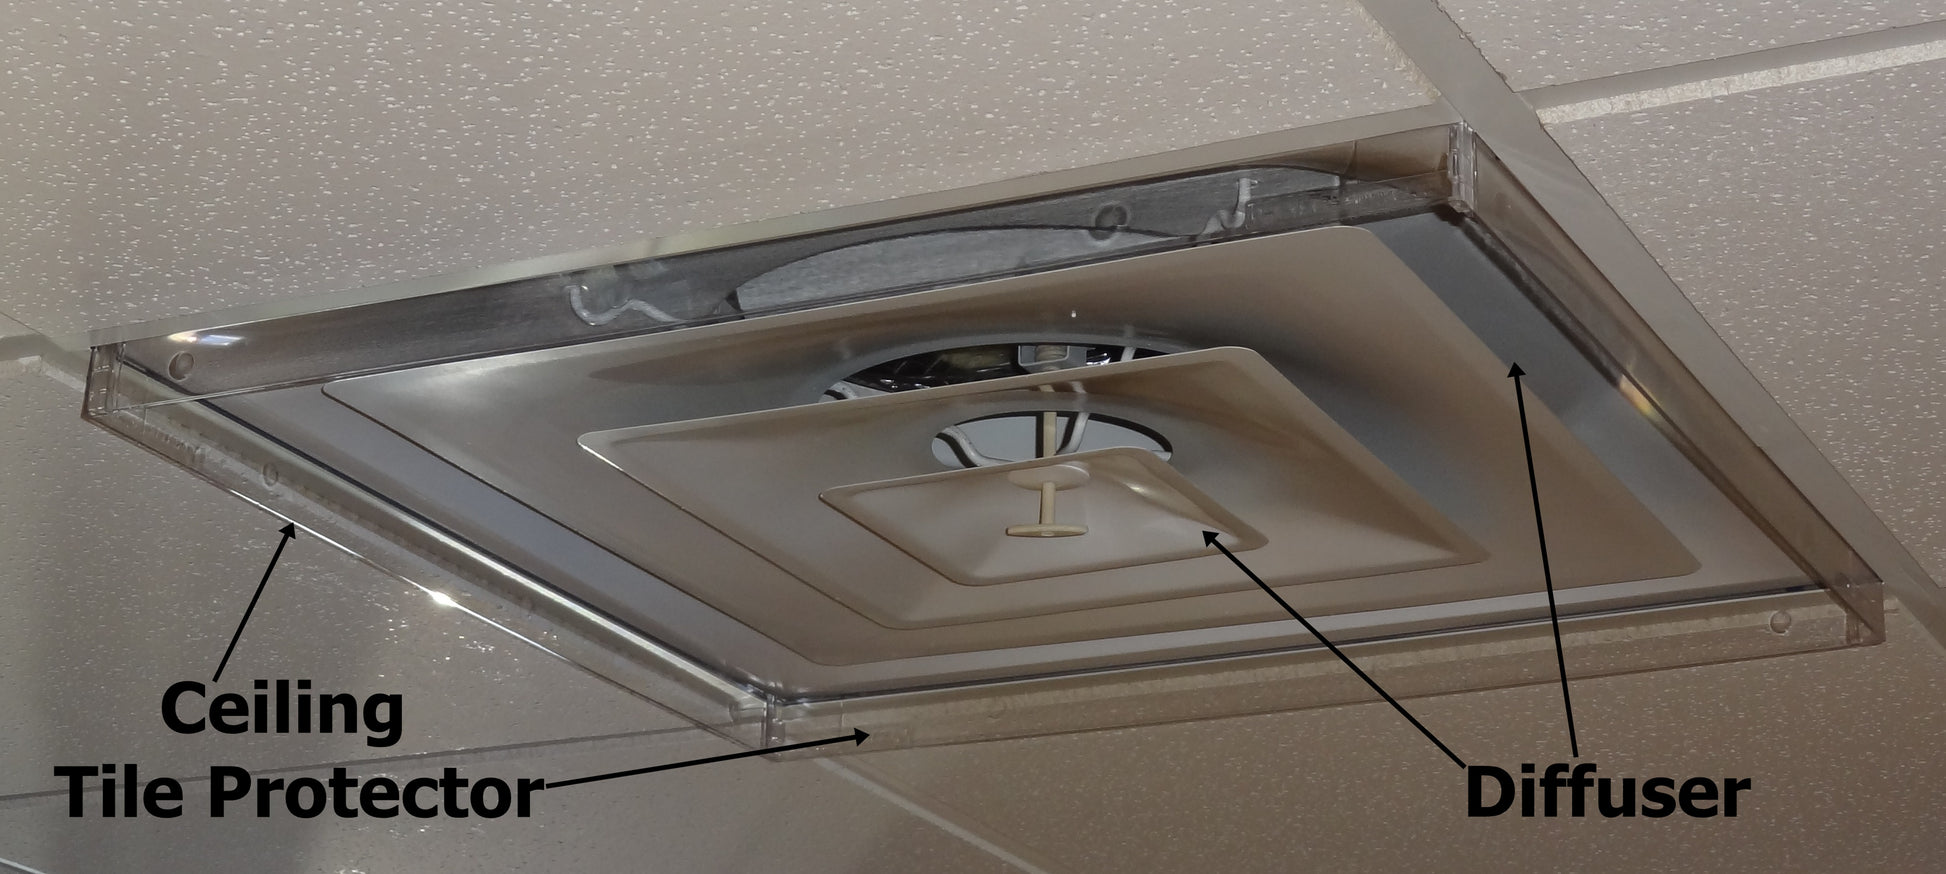 Close up of Airtech Inserts Plastic Ceiling Tile Protector in place on ceiling vent in a commercial setting with black labels identifying the Protector and Diffuser